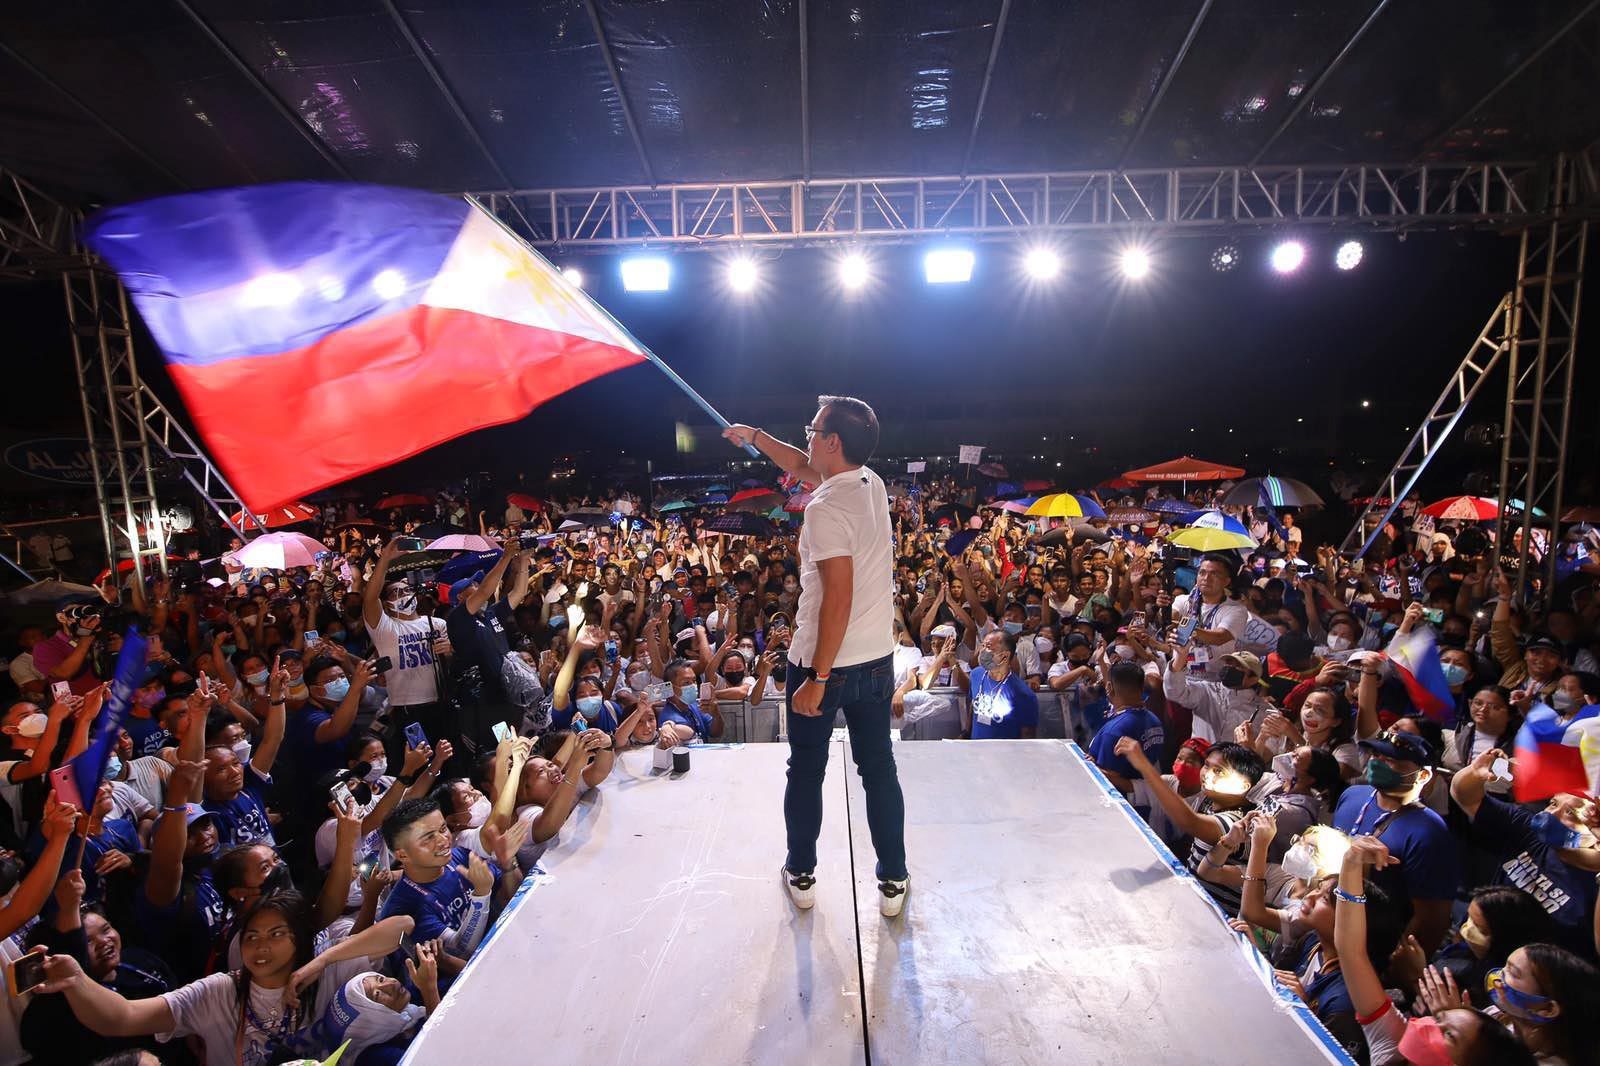 Isko draws crowds in Western Visayas but local party leader resignation casts cloud